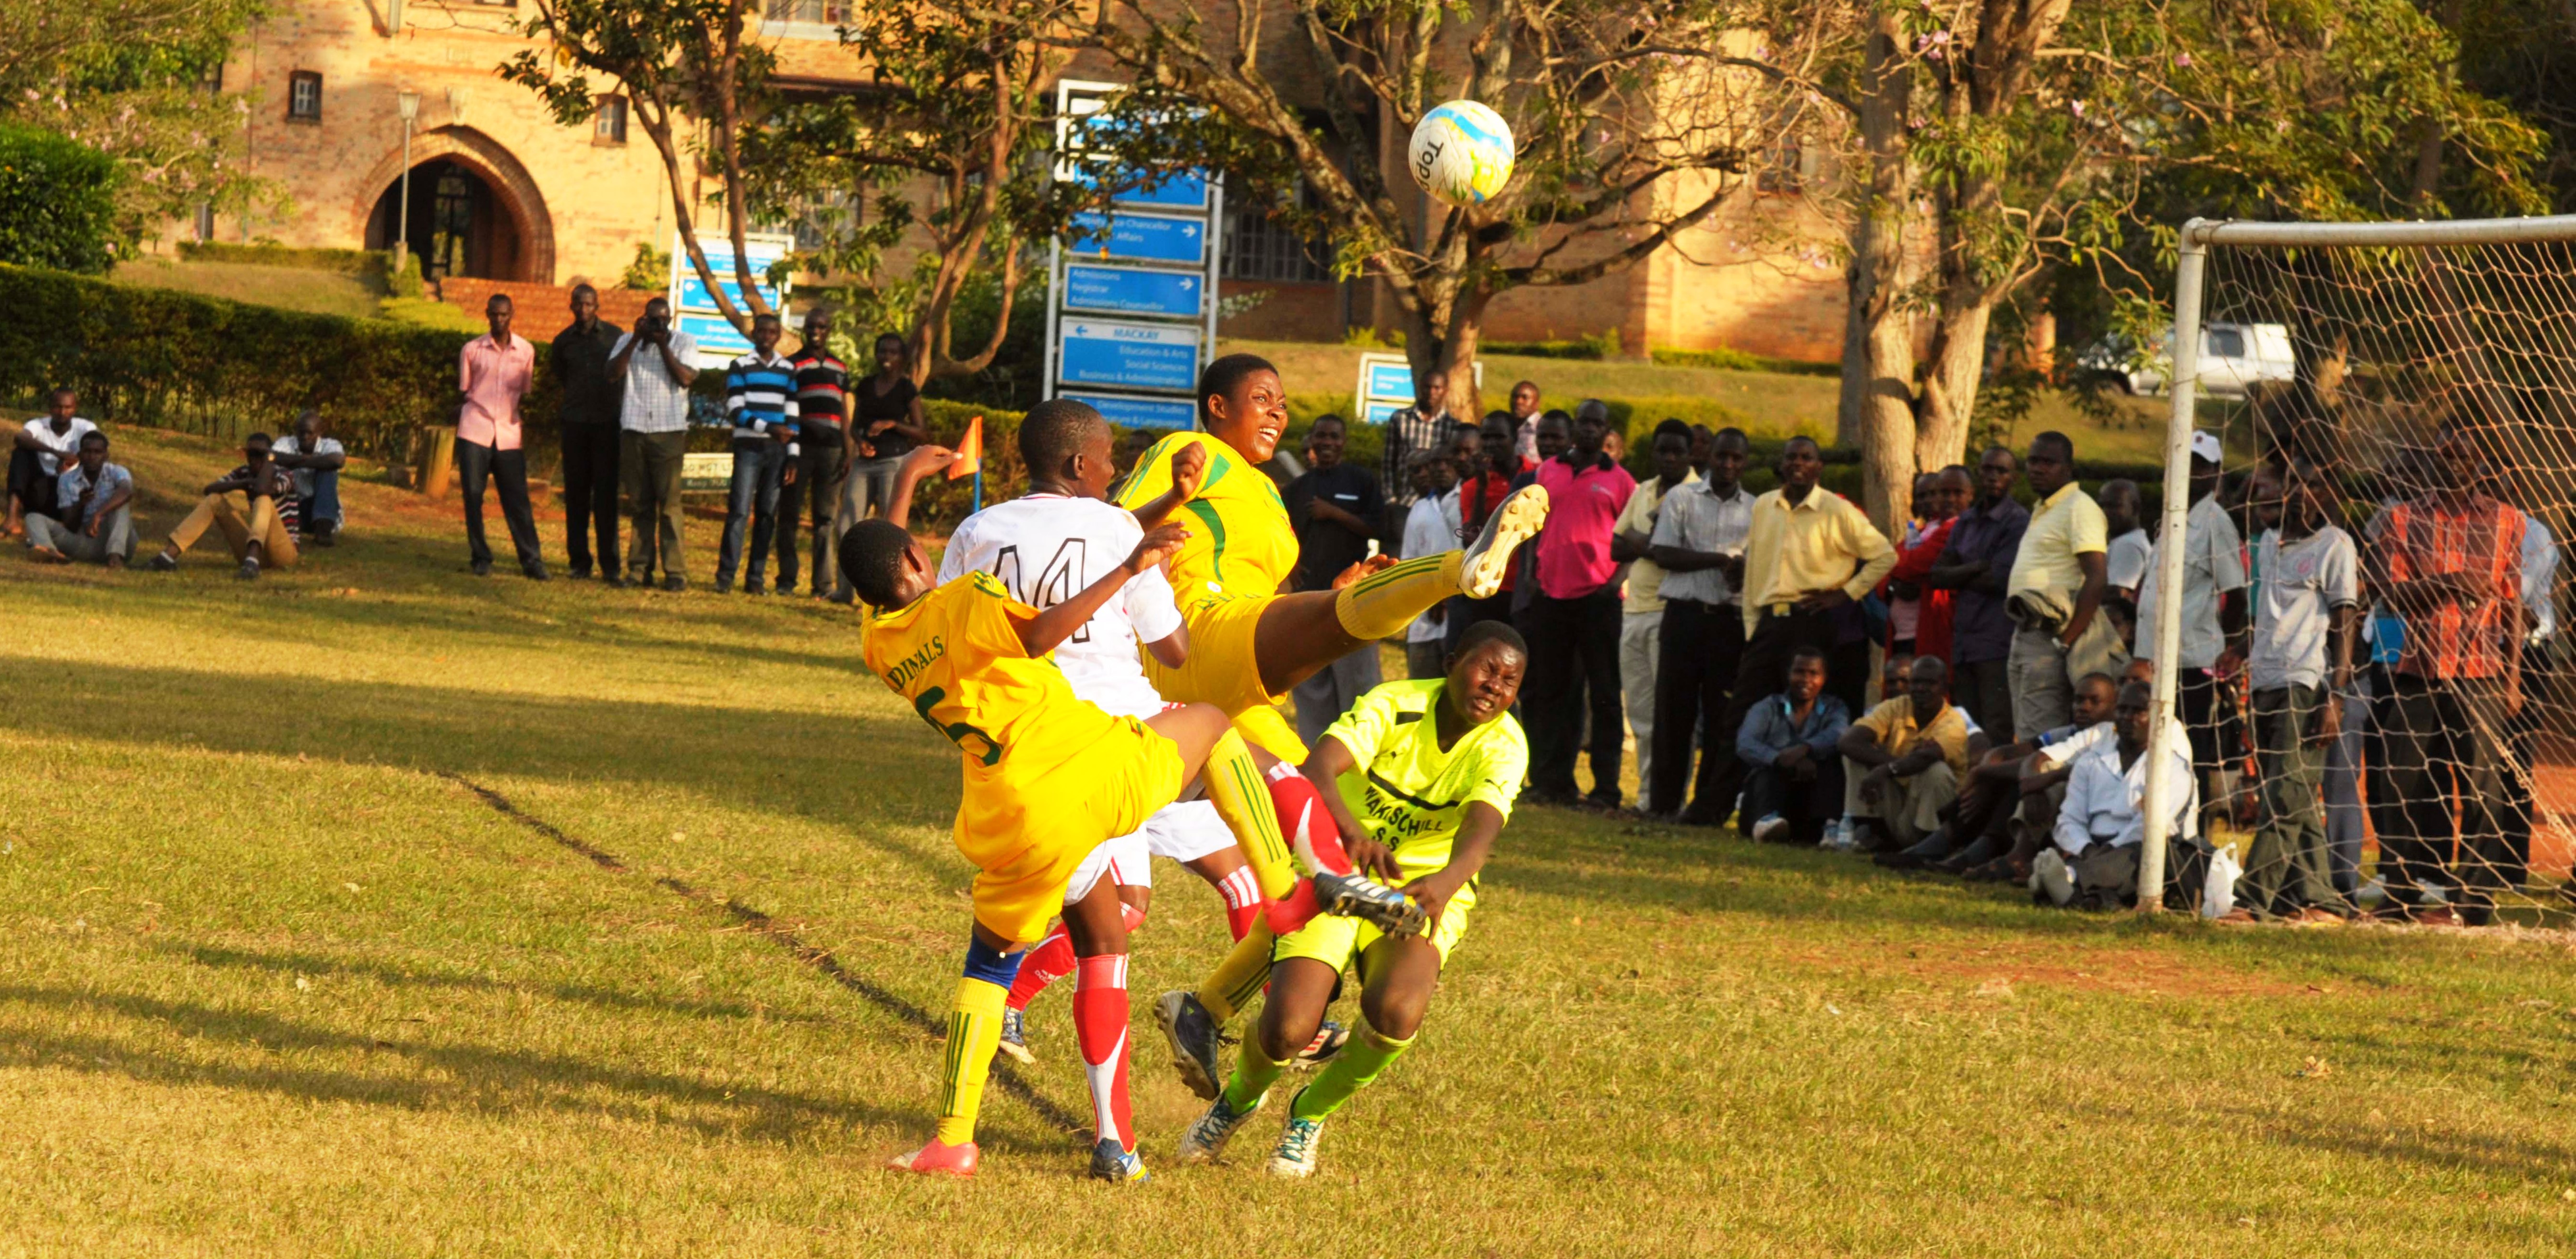 UCU Lady Cardinals' goal scorer Vicky Nakibuuka (2nd right) attempts to score agains Wakiso Hill School's Penianah Adwono (right) in a Women Elite league game played at UCU in Mukono